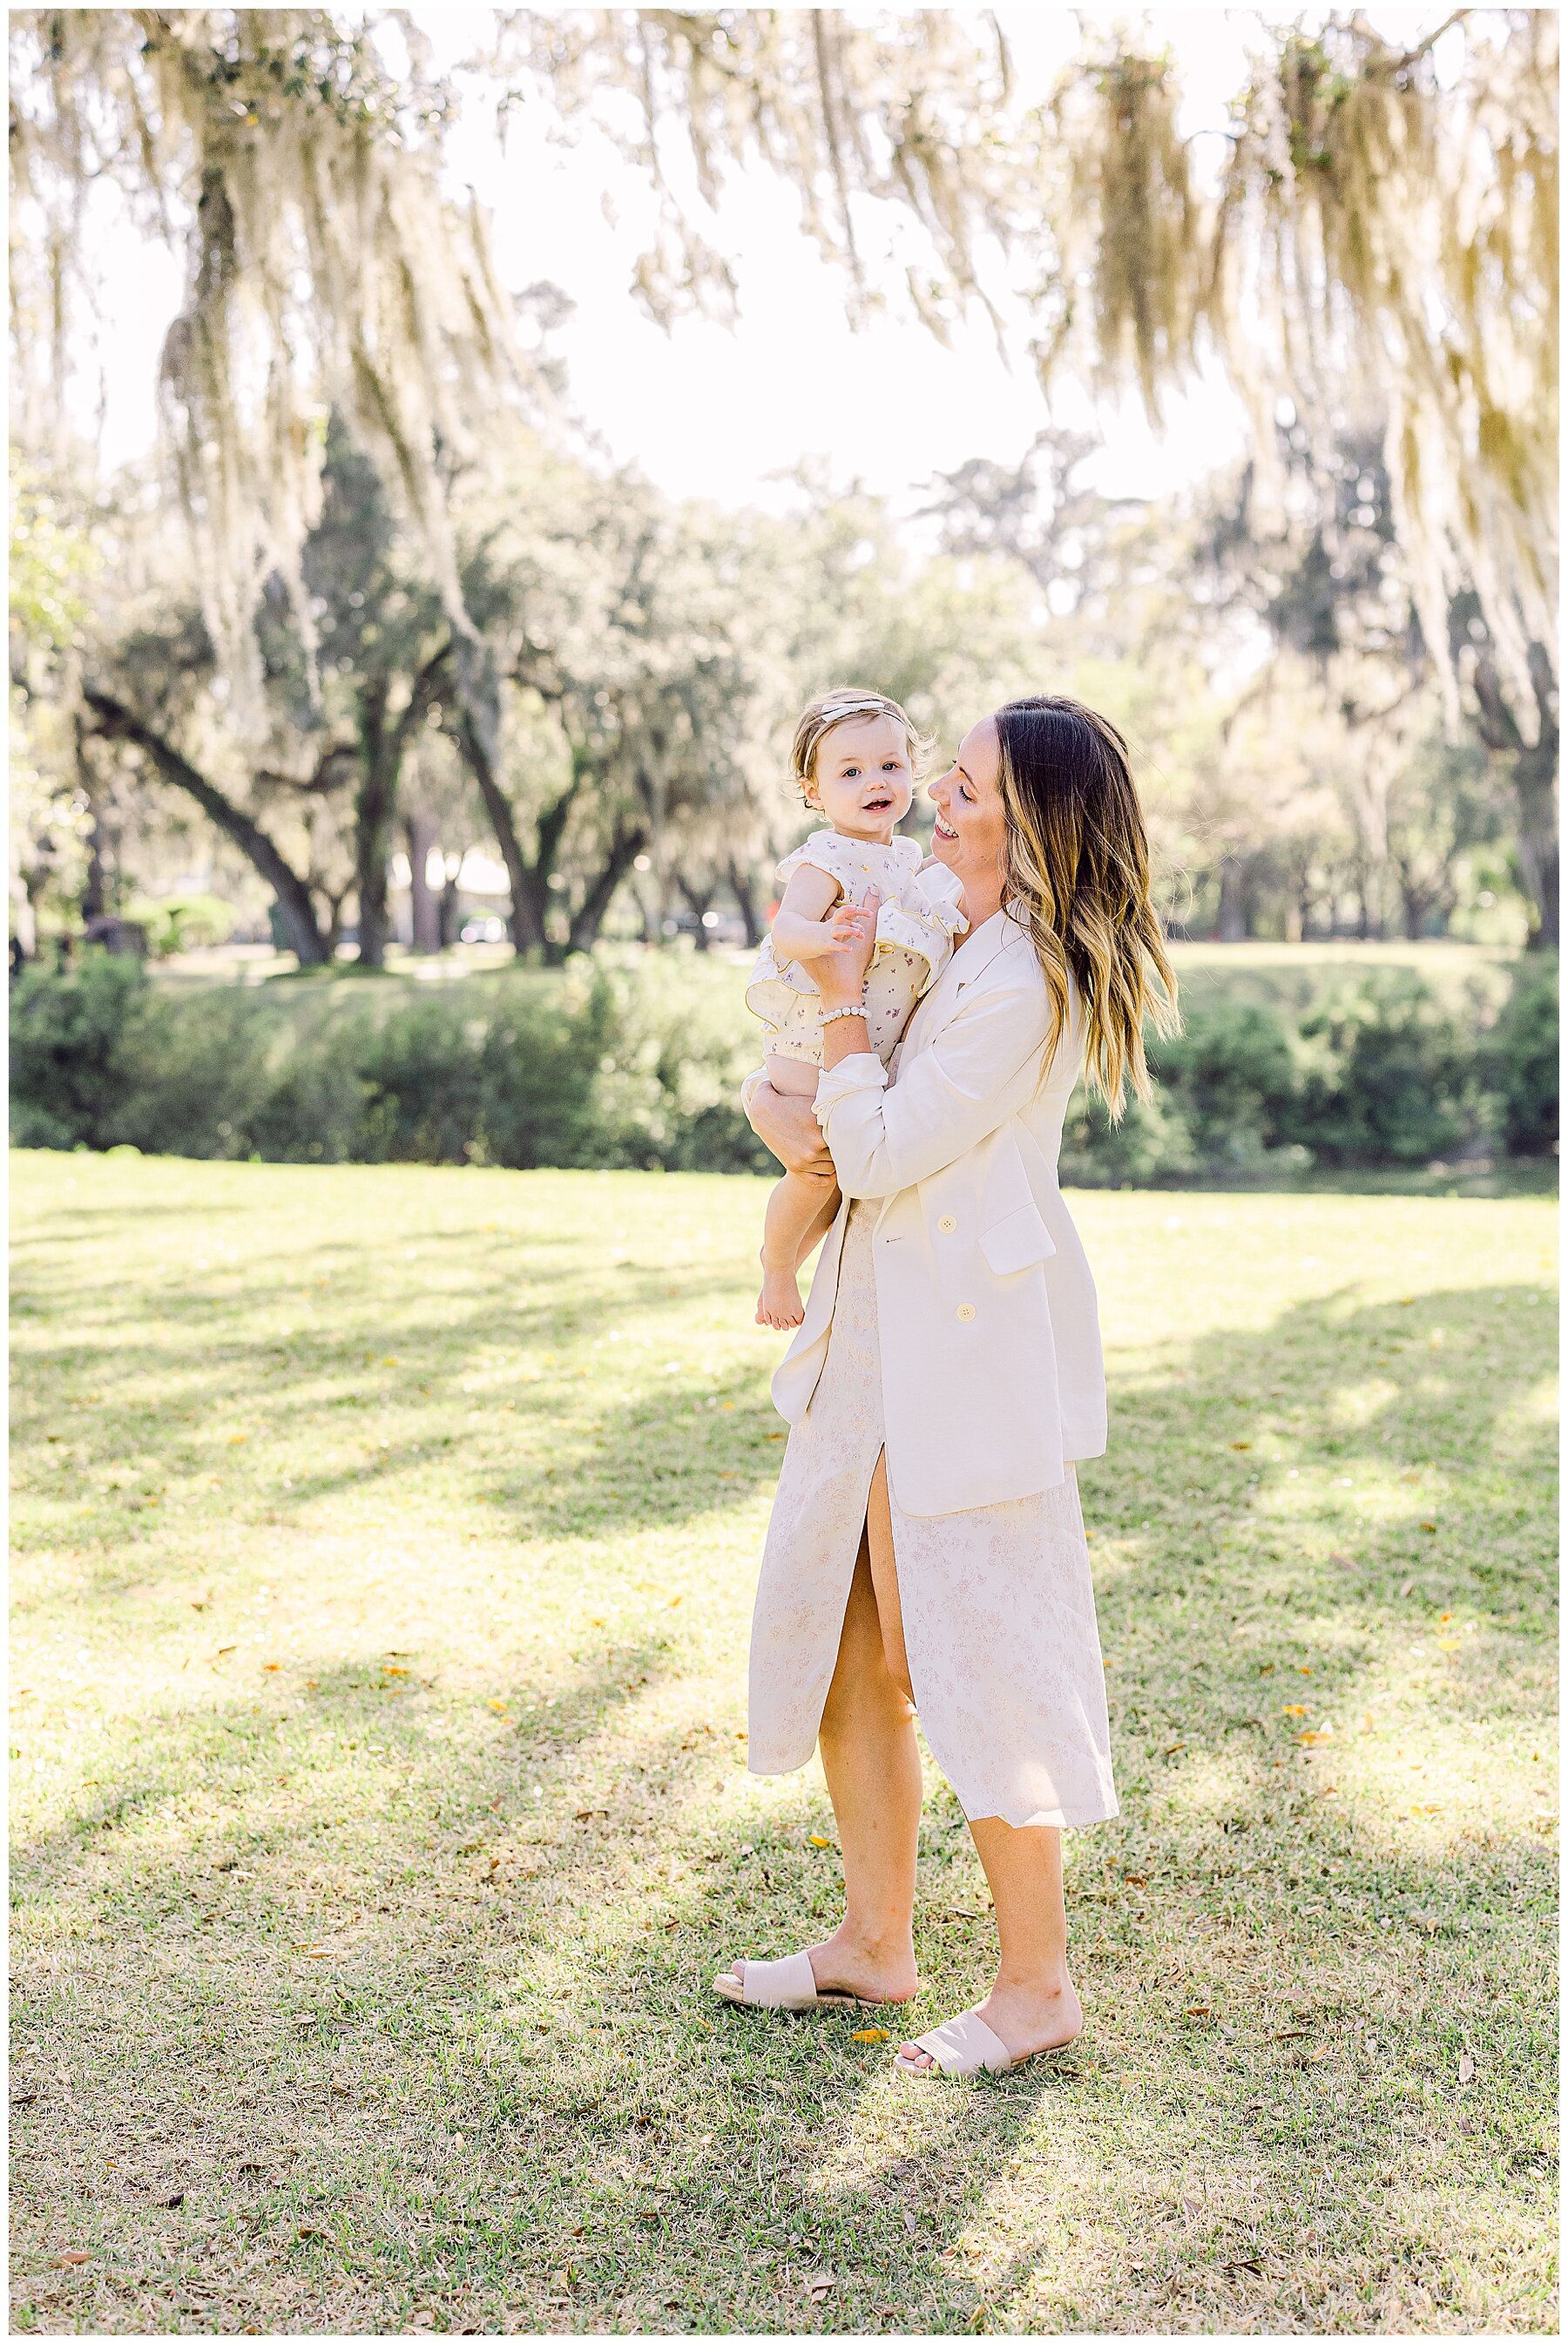 Katherine_Ives_Photography_Sallah_Palmetto_Bluff_Family_Session_25.JPG